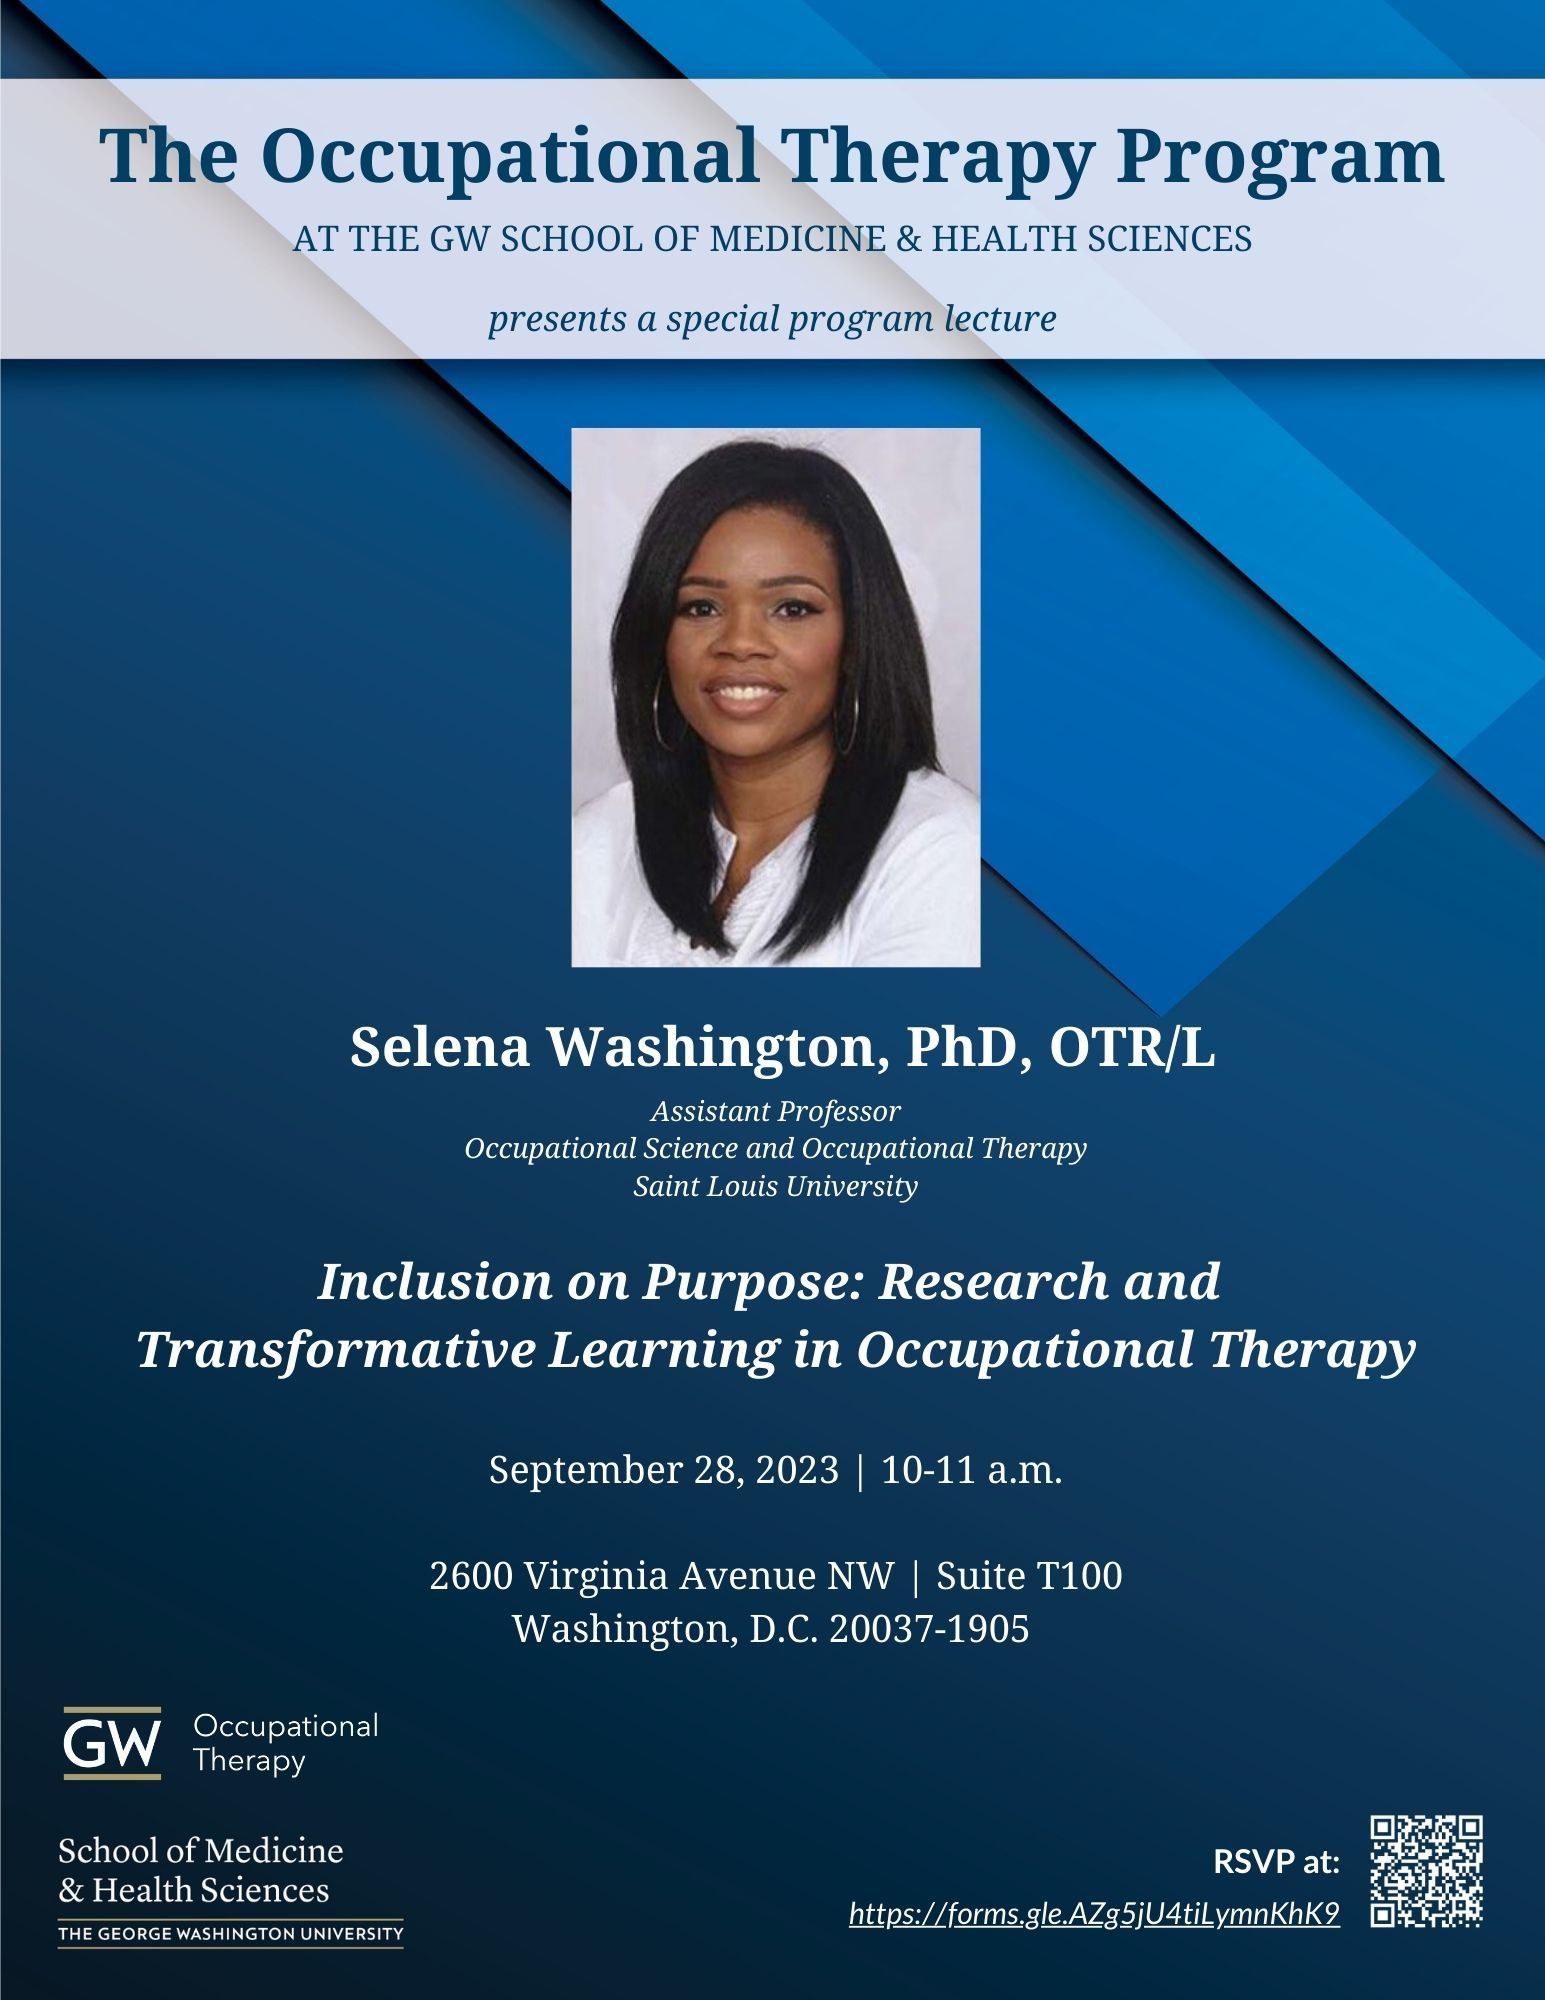 Flyer for Selena Washington, PhD, OTR/L lecture on inclusion, research, and occupational therapy.